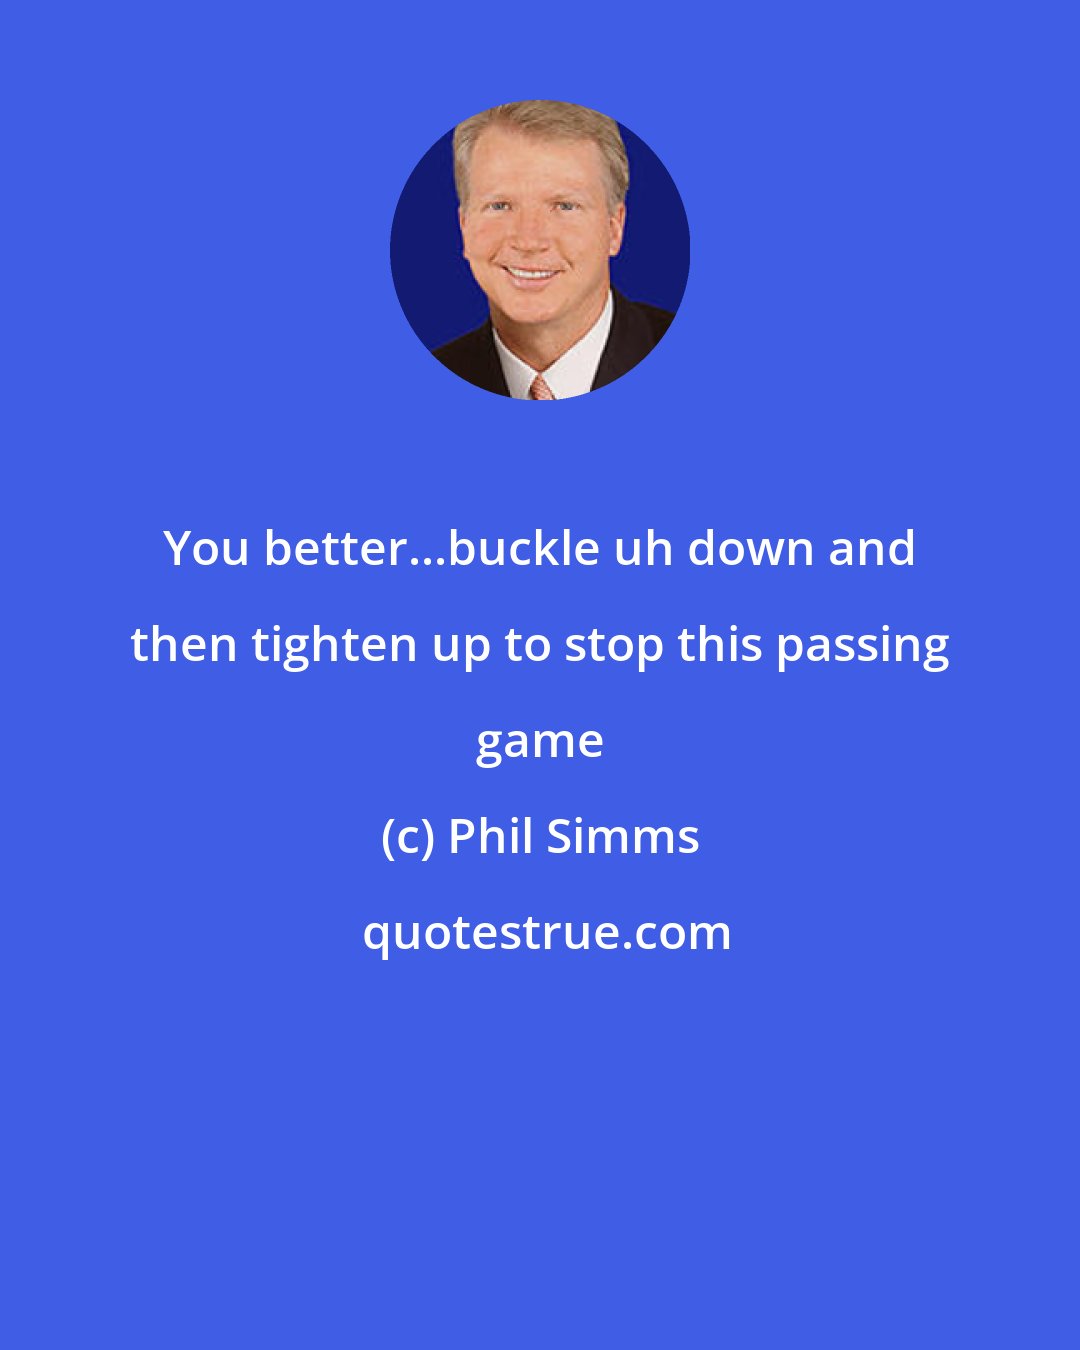 Phil Simms: You better...buckle uh down and then tighten up to stop this passing game